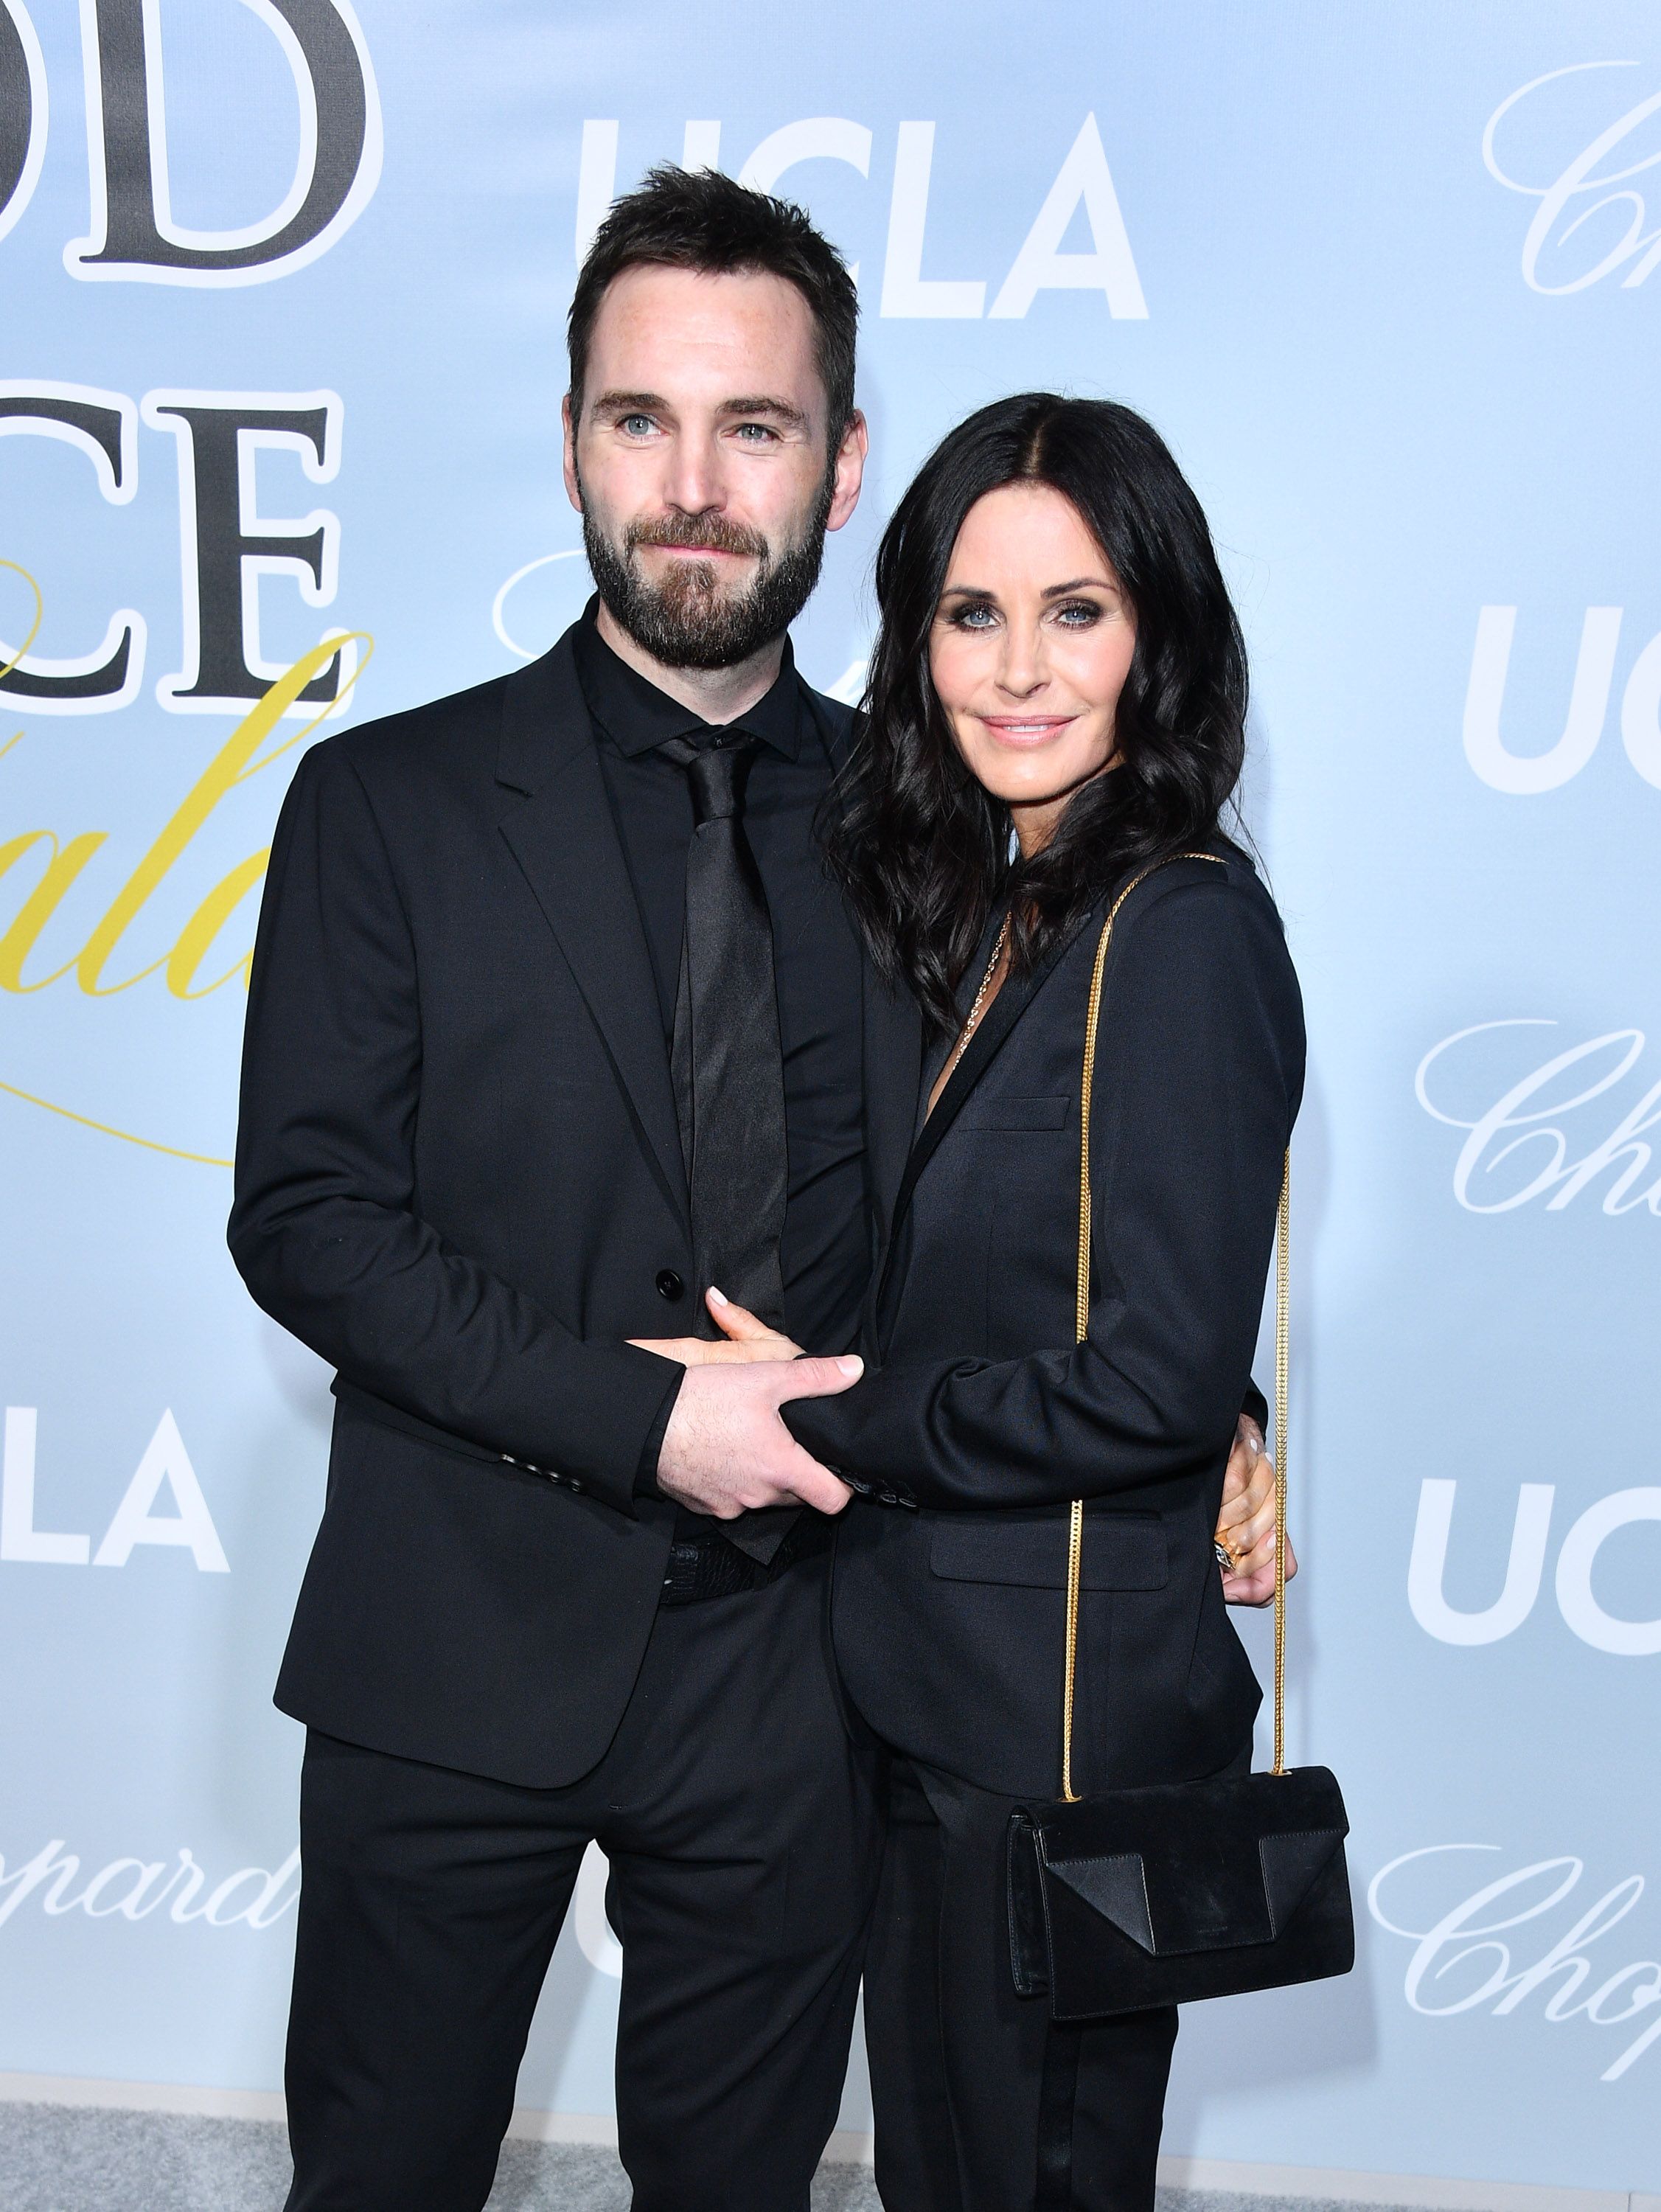 Johnny McDaid and Courteney Cox at the 2019 Hollywood For Science Gala in 2019 in Los Angeles, California | Source: Getty Images